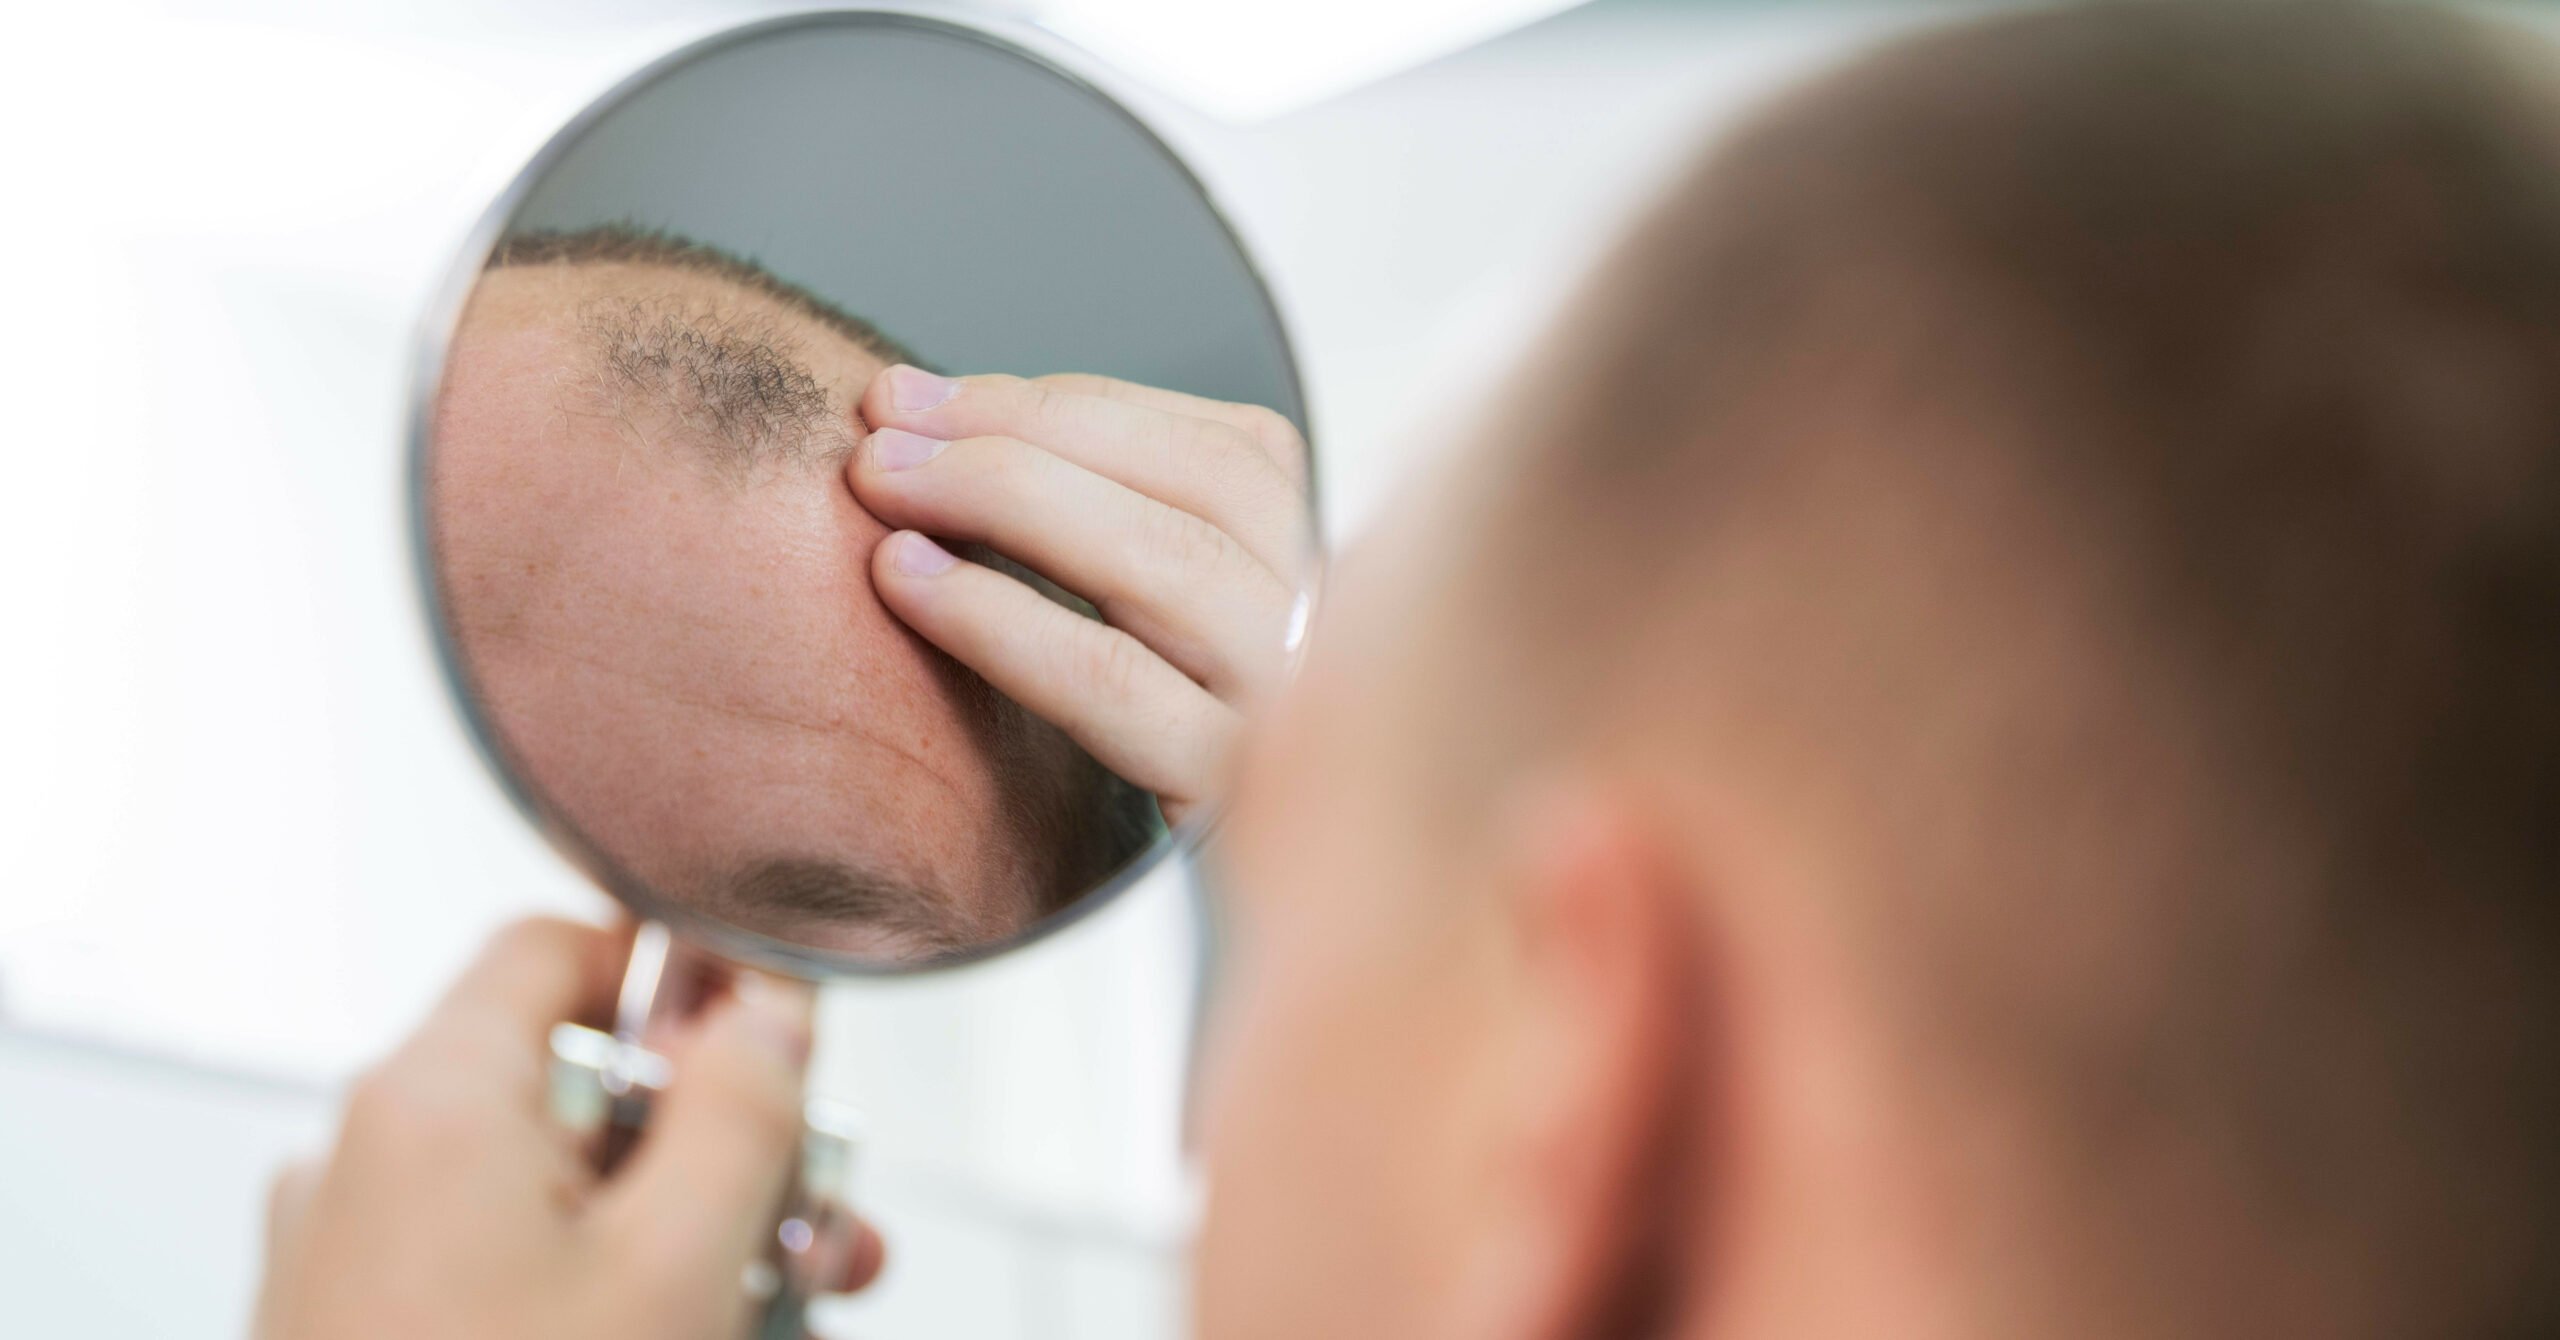 THE COMPREHENSIVE GUIDE TO CHOOSING THE MOST EFFECTIVE MEDICATIONS FOR COMBATING HAIR LOSS